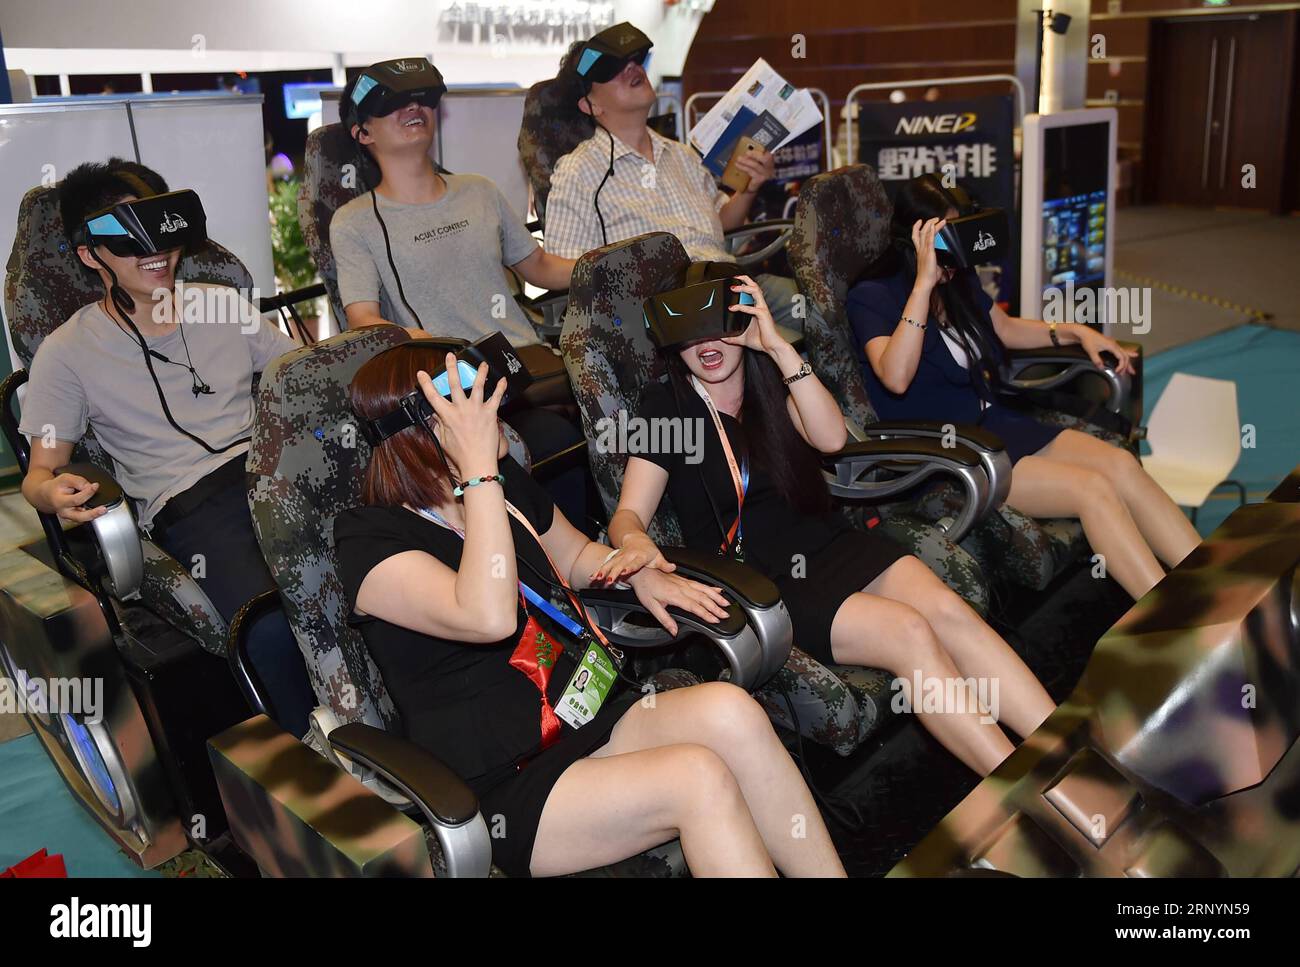 (180327) -- BEIJING, March 27, 2018 -- Visitors try out virtual reality (VR) devices at Beijing International Fair for Trade in Services in Beijing, capital of China, May 28, 2017. The Beijing International Fair for Trade in Services was held from May 28 to June 1, 2017, aiming at encouraging the opening up and cooperation of the service trade. A huge trade deficit with China is reportedly behind the U.S. administration s plan to slap tariffs on up to 60 billion U.S. dollars of Chinese imports and restrict Chinese investment. But data sometimes lies, and could shield the bigger picture.) (djj) Stock Photo